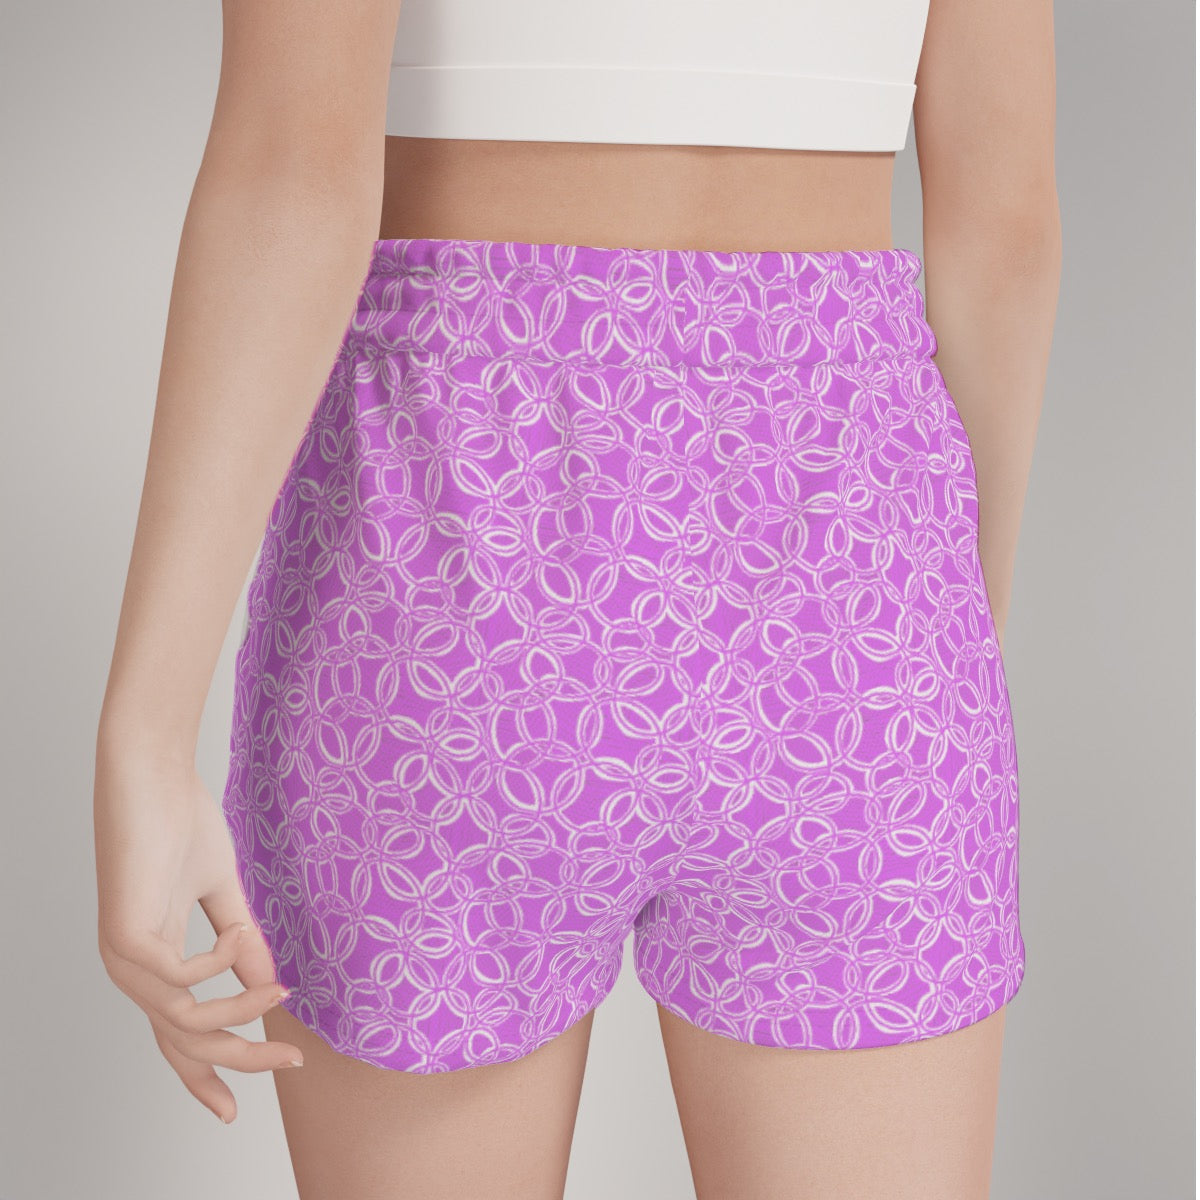 Geometrical Pink Women's Casual Shorts. Pattern hand-painted by the Designer Maria Alejandra Echenique